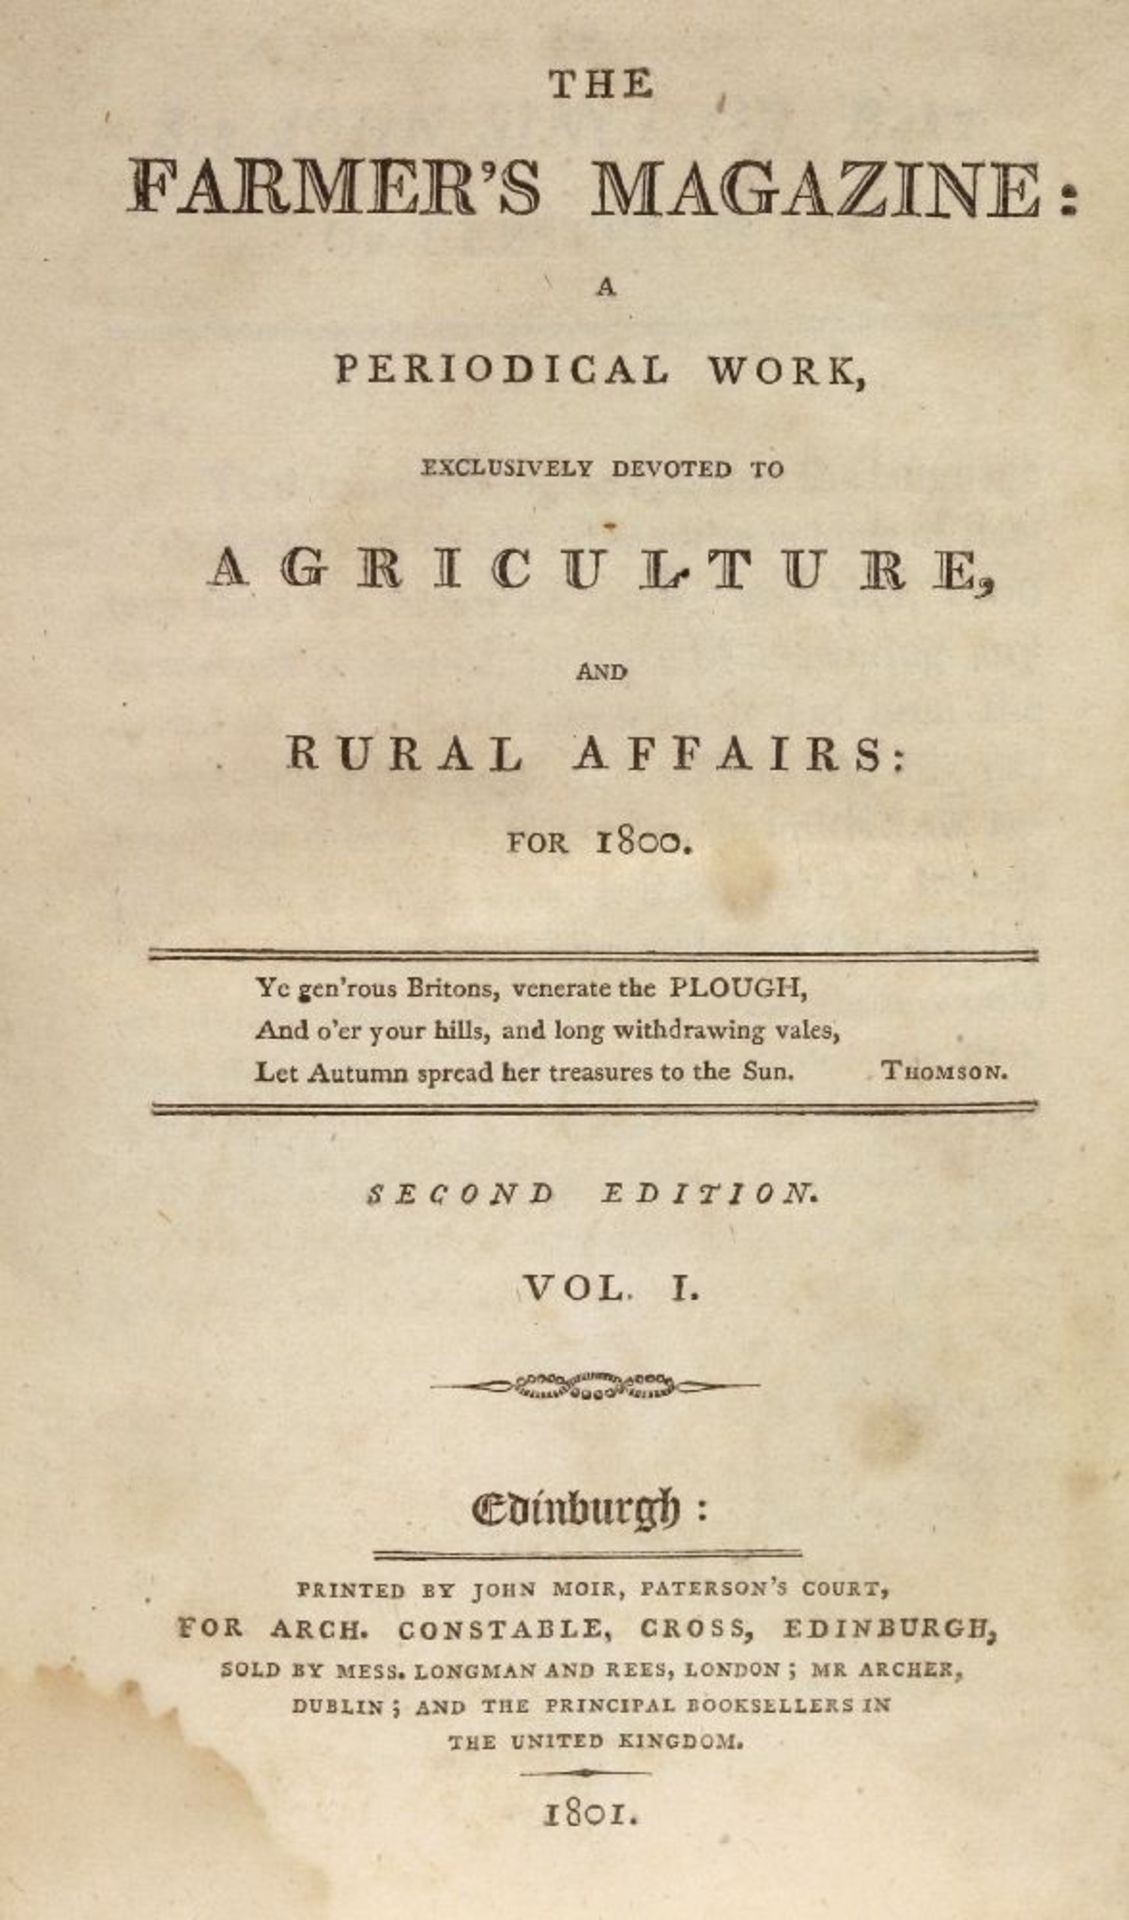 The Farmer's Magazine: Volumes 1-16. Constable, Edinburgh, 1801-1815, all first editions except - Image 2 of 2